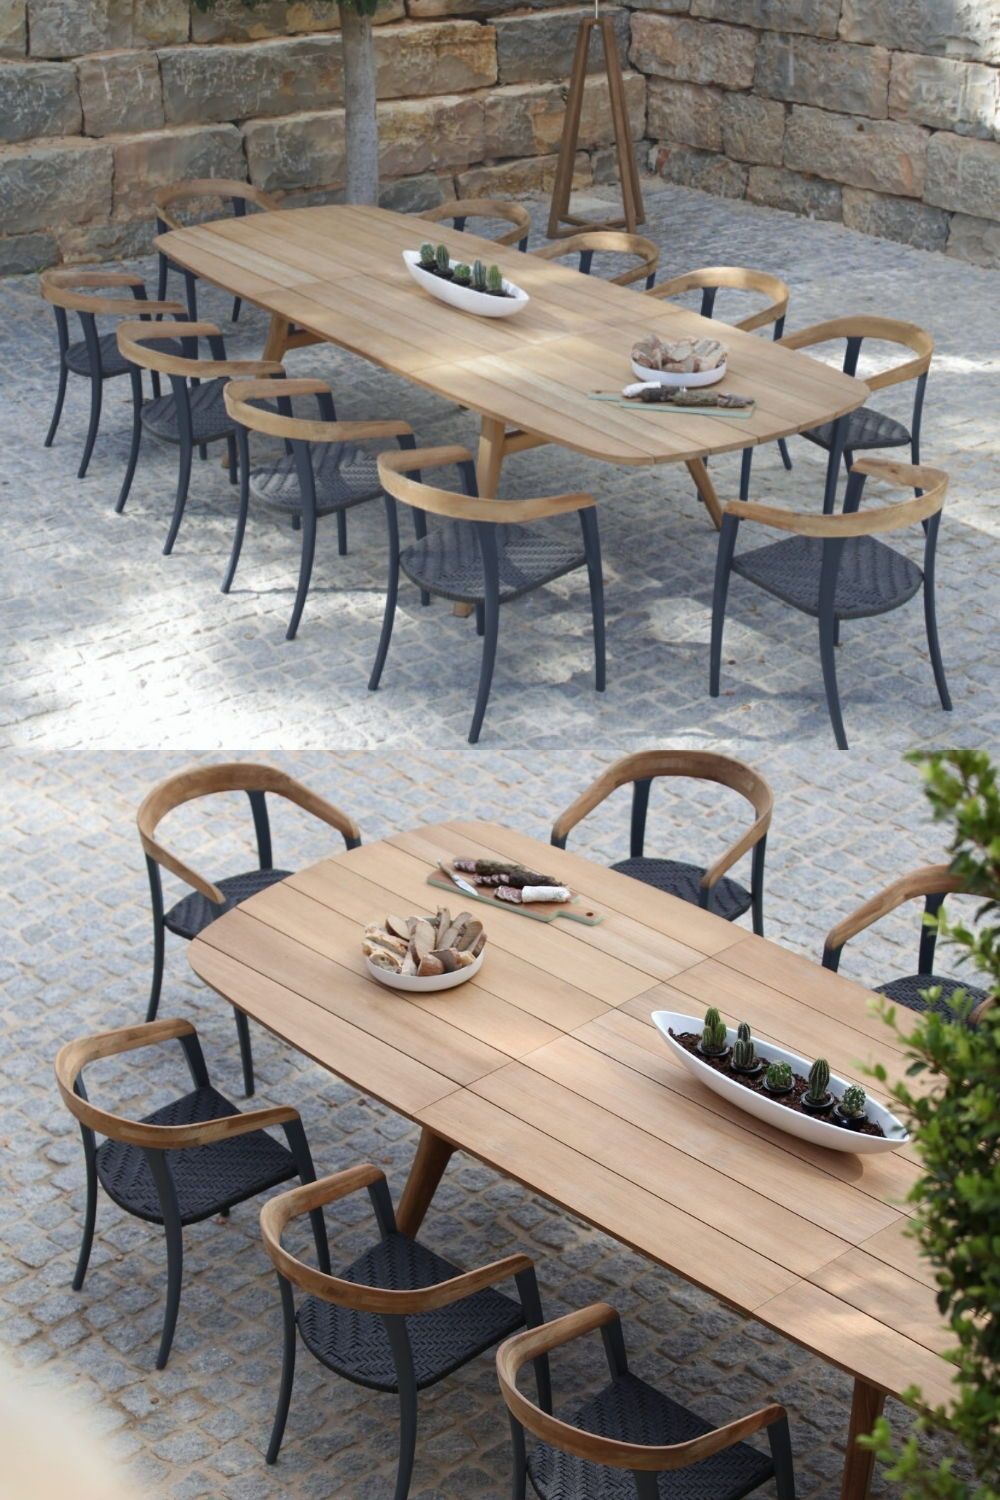 The Best Outdoor Dining Set Options for Your Patio